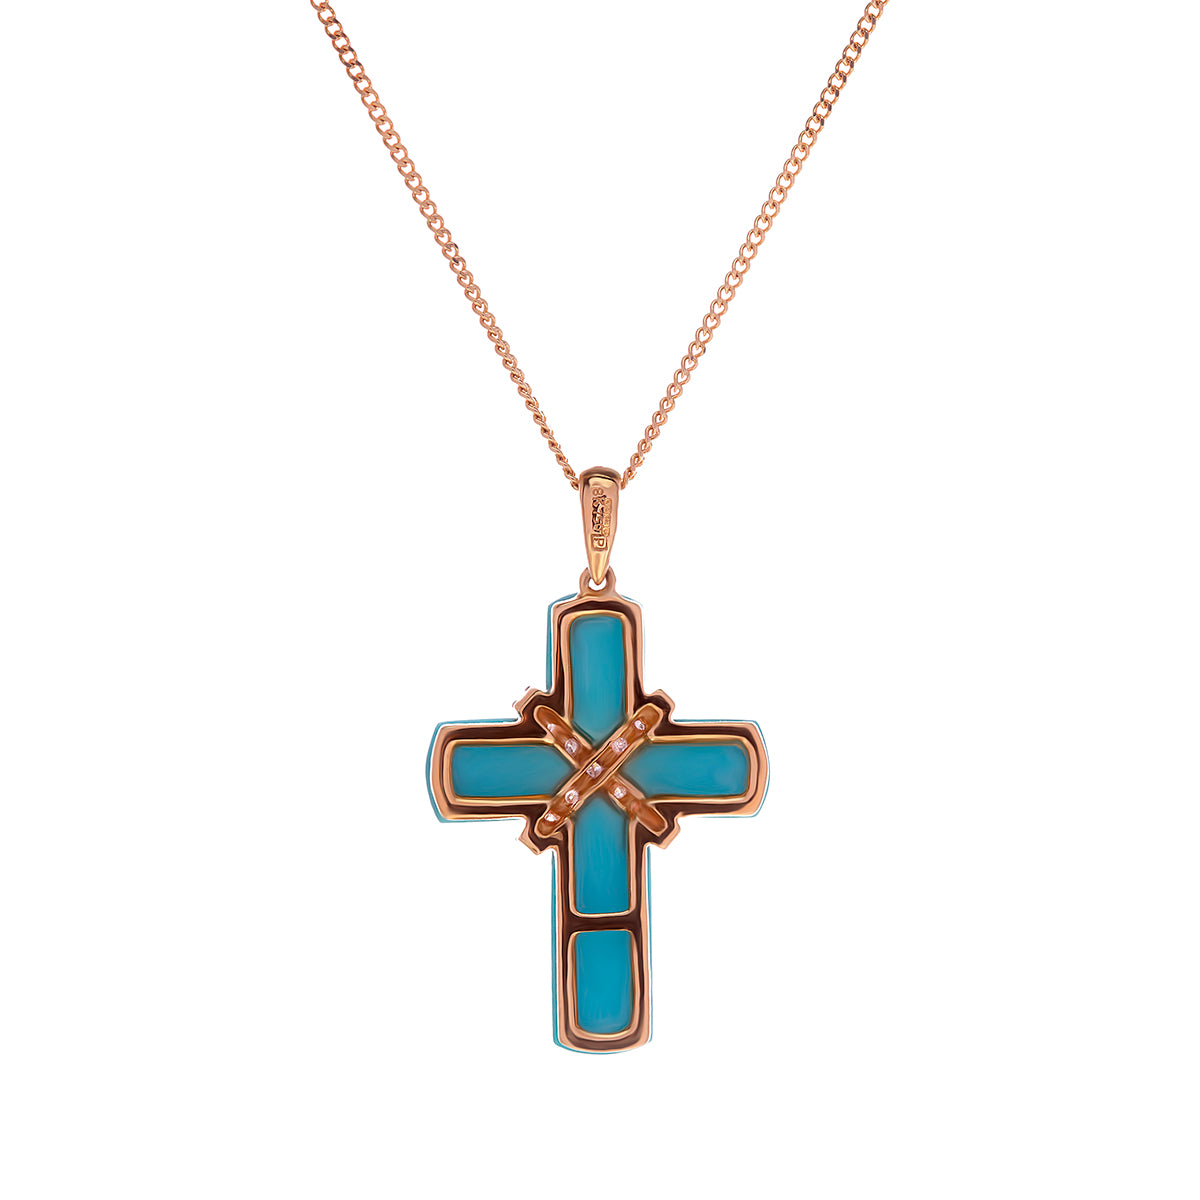 Cash Converters - Valued $1950 18CT Yellow Gold Cross Pendant Necklace